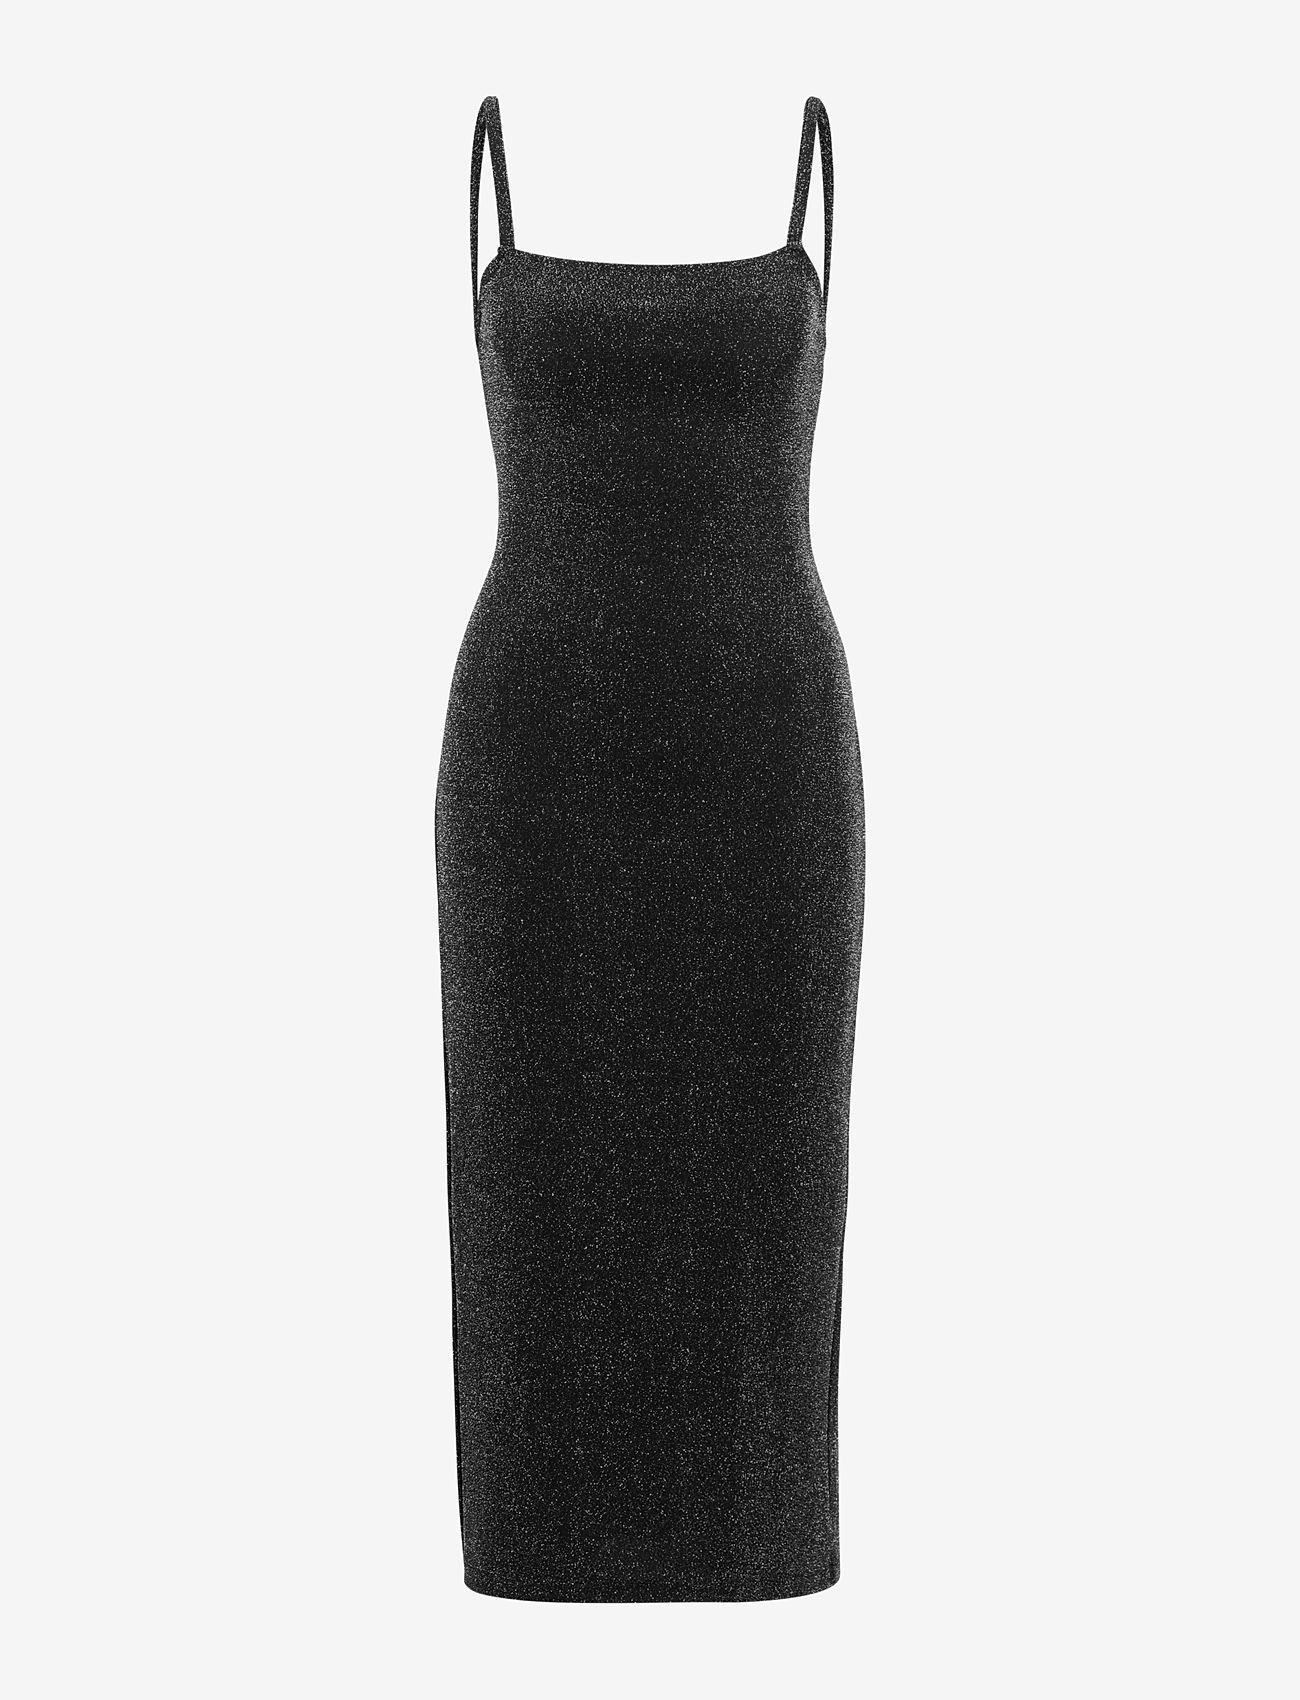 HUGO - Nolores - party wear at outlet prices - black - 0